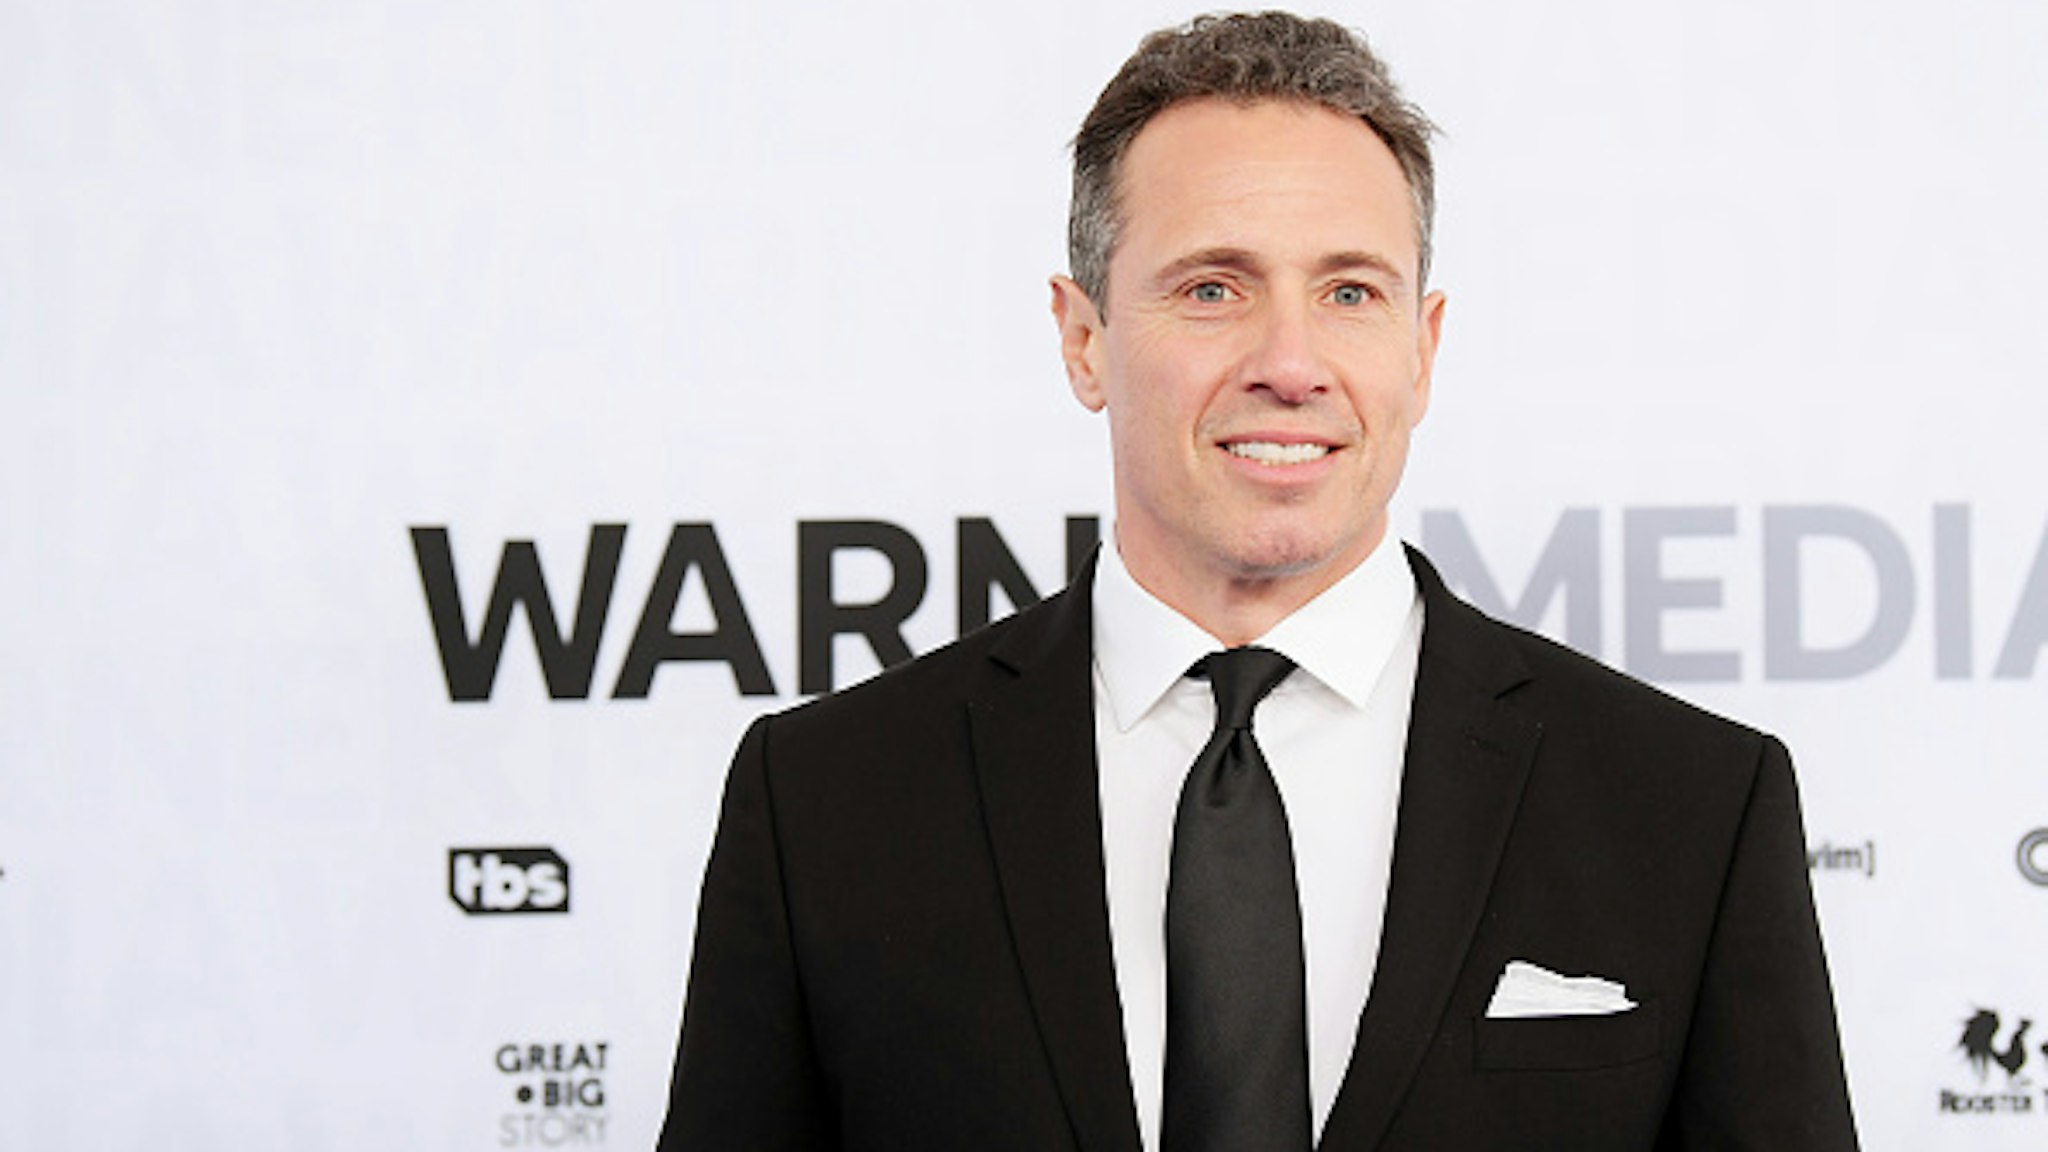 NEW YORK, NEW YORK - MAY 15: Chris Cuomo of CNN’s Cuomo Prime Time attends the WarnerMedia Upfront 2019 arrivals on the red carpet at The Theater at Madison Square Garden on May 15, 2019 in New York City. 602140